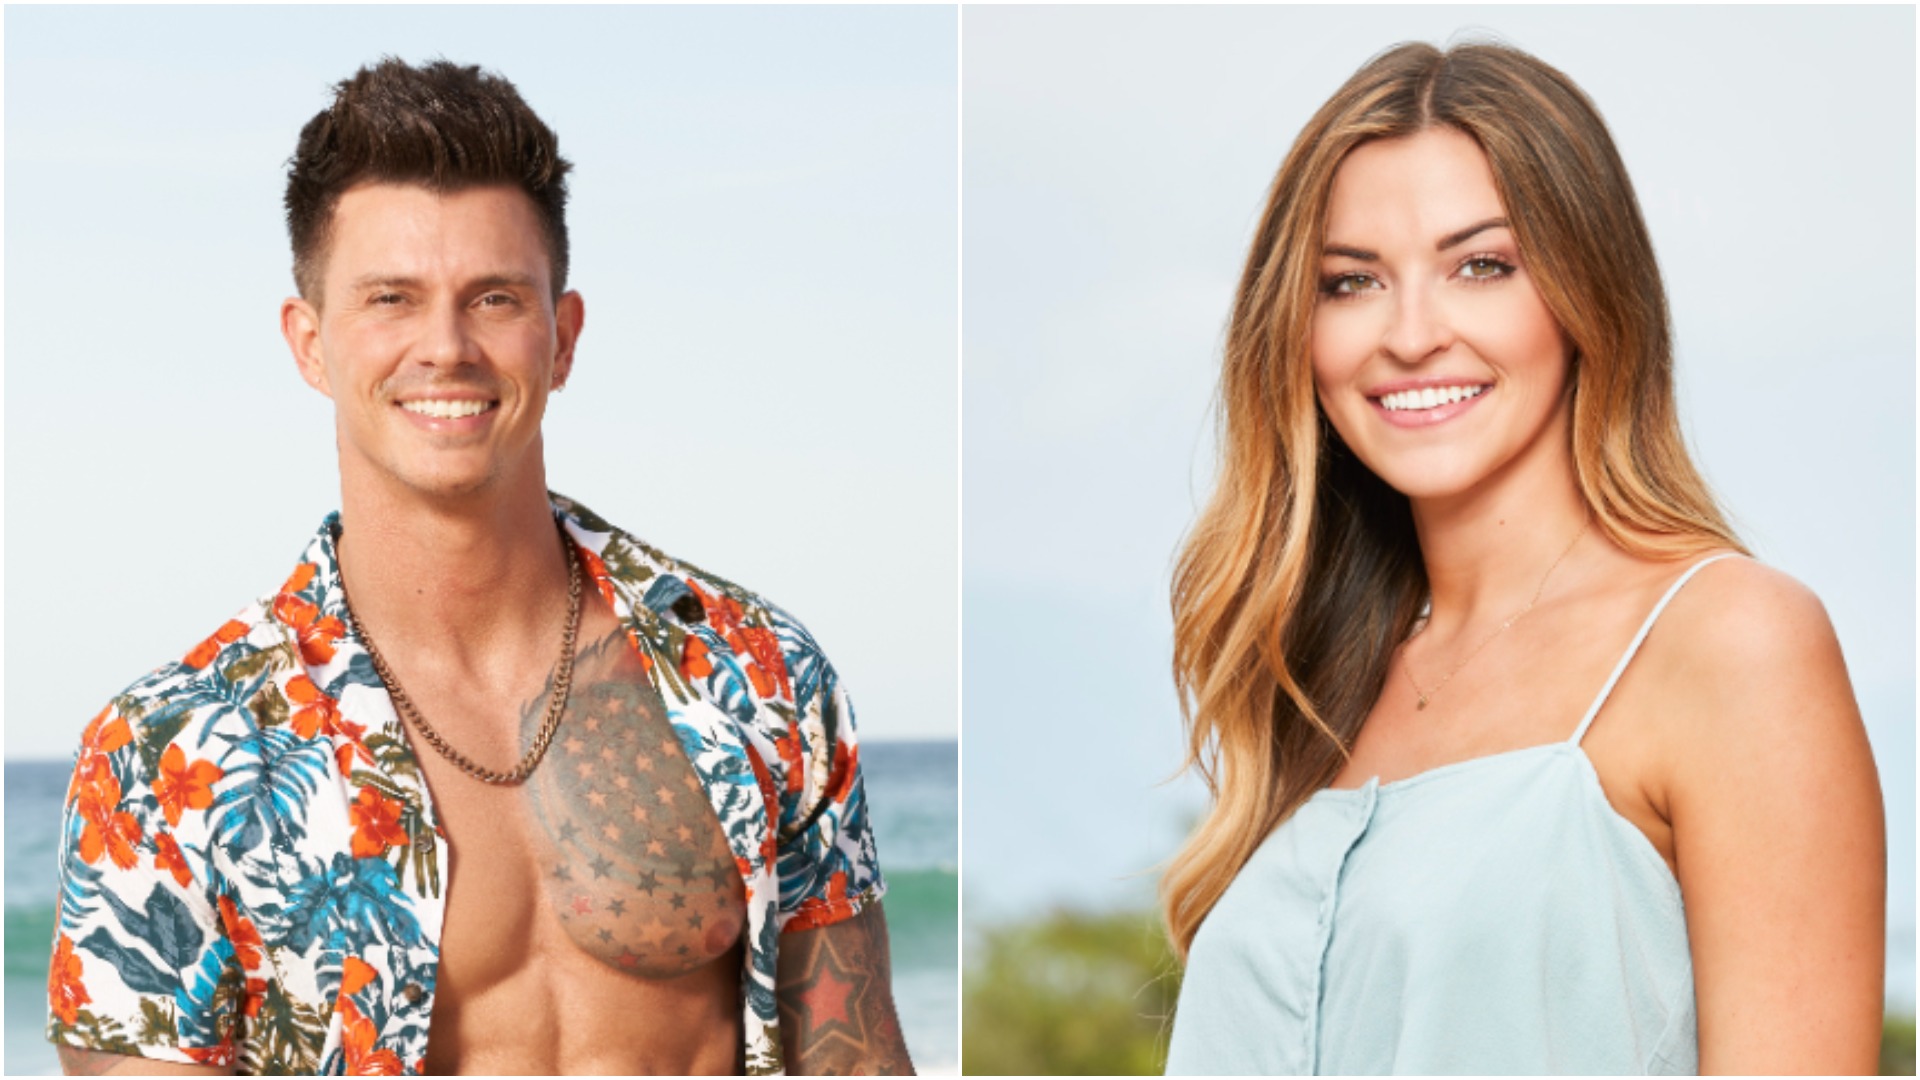 Headshot of Kenny Braasch and Tia Booth from ‘Bachelor in Paradise’ 2021